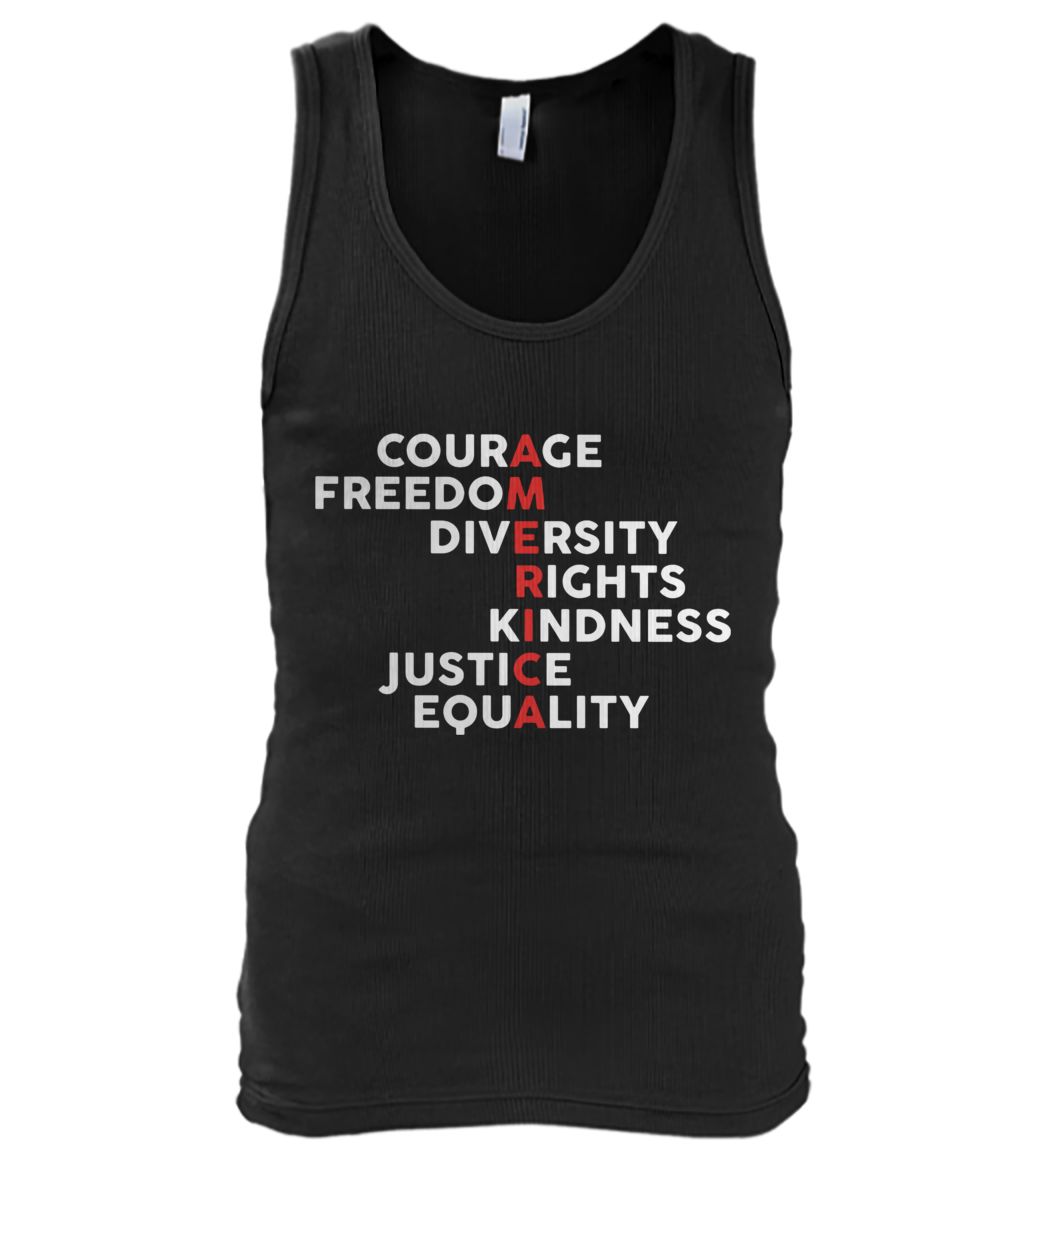 Courage freedom diversity diversity rights kindness justice equality men's tank top